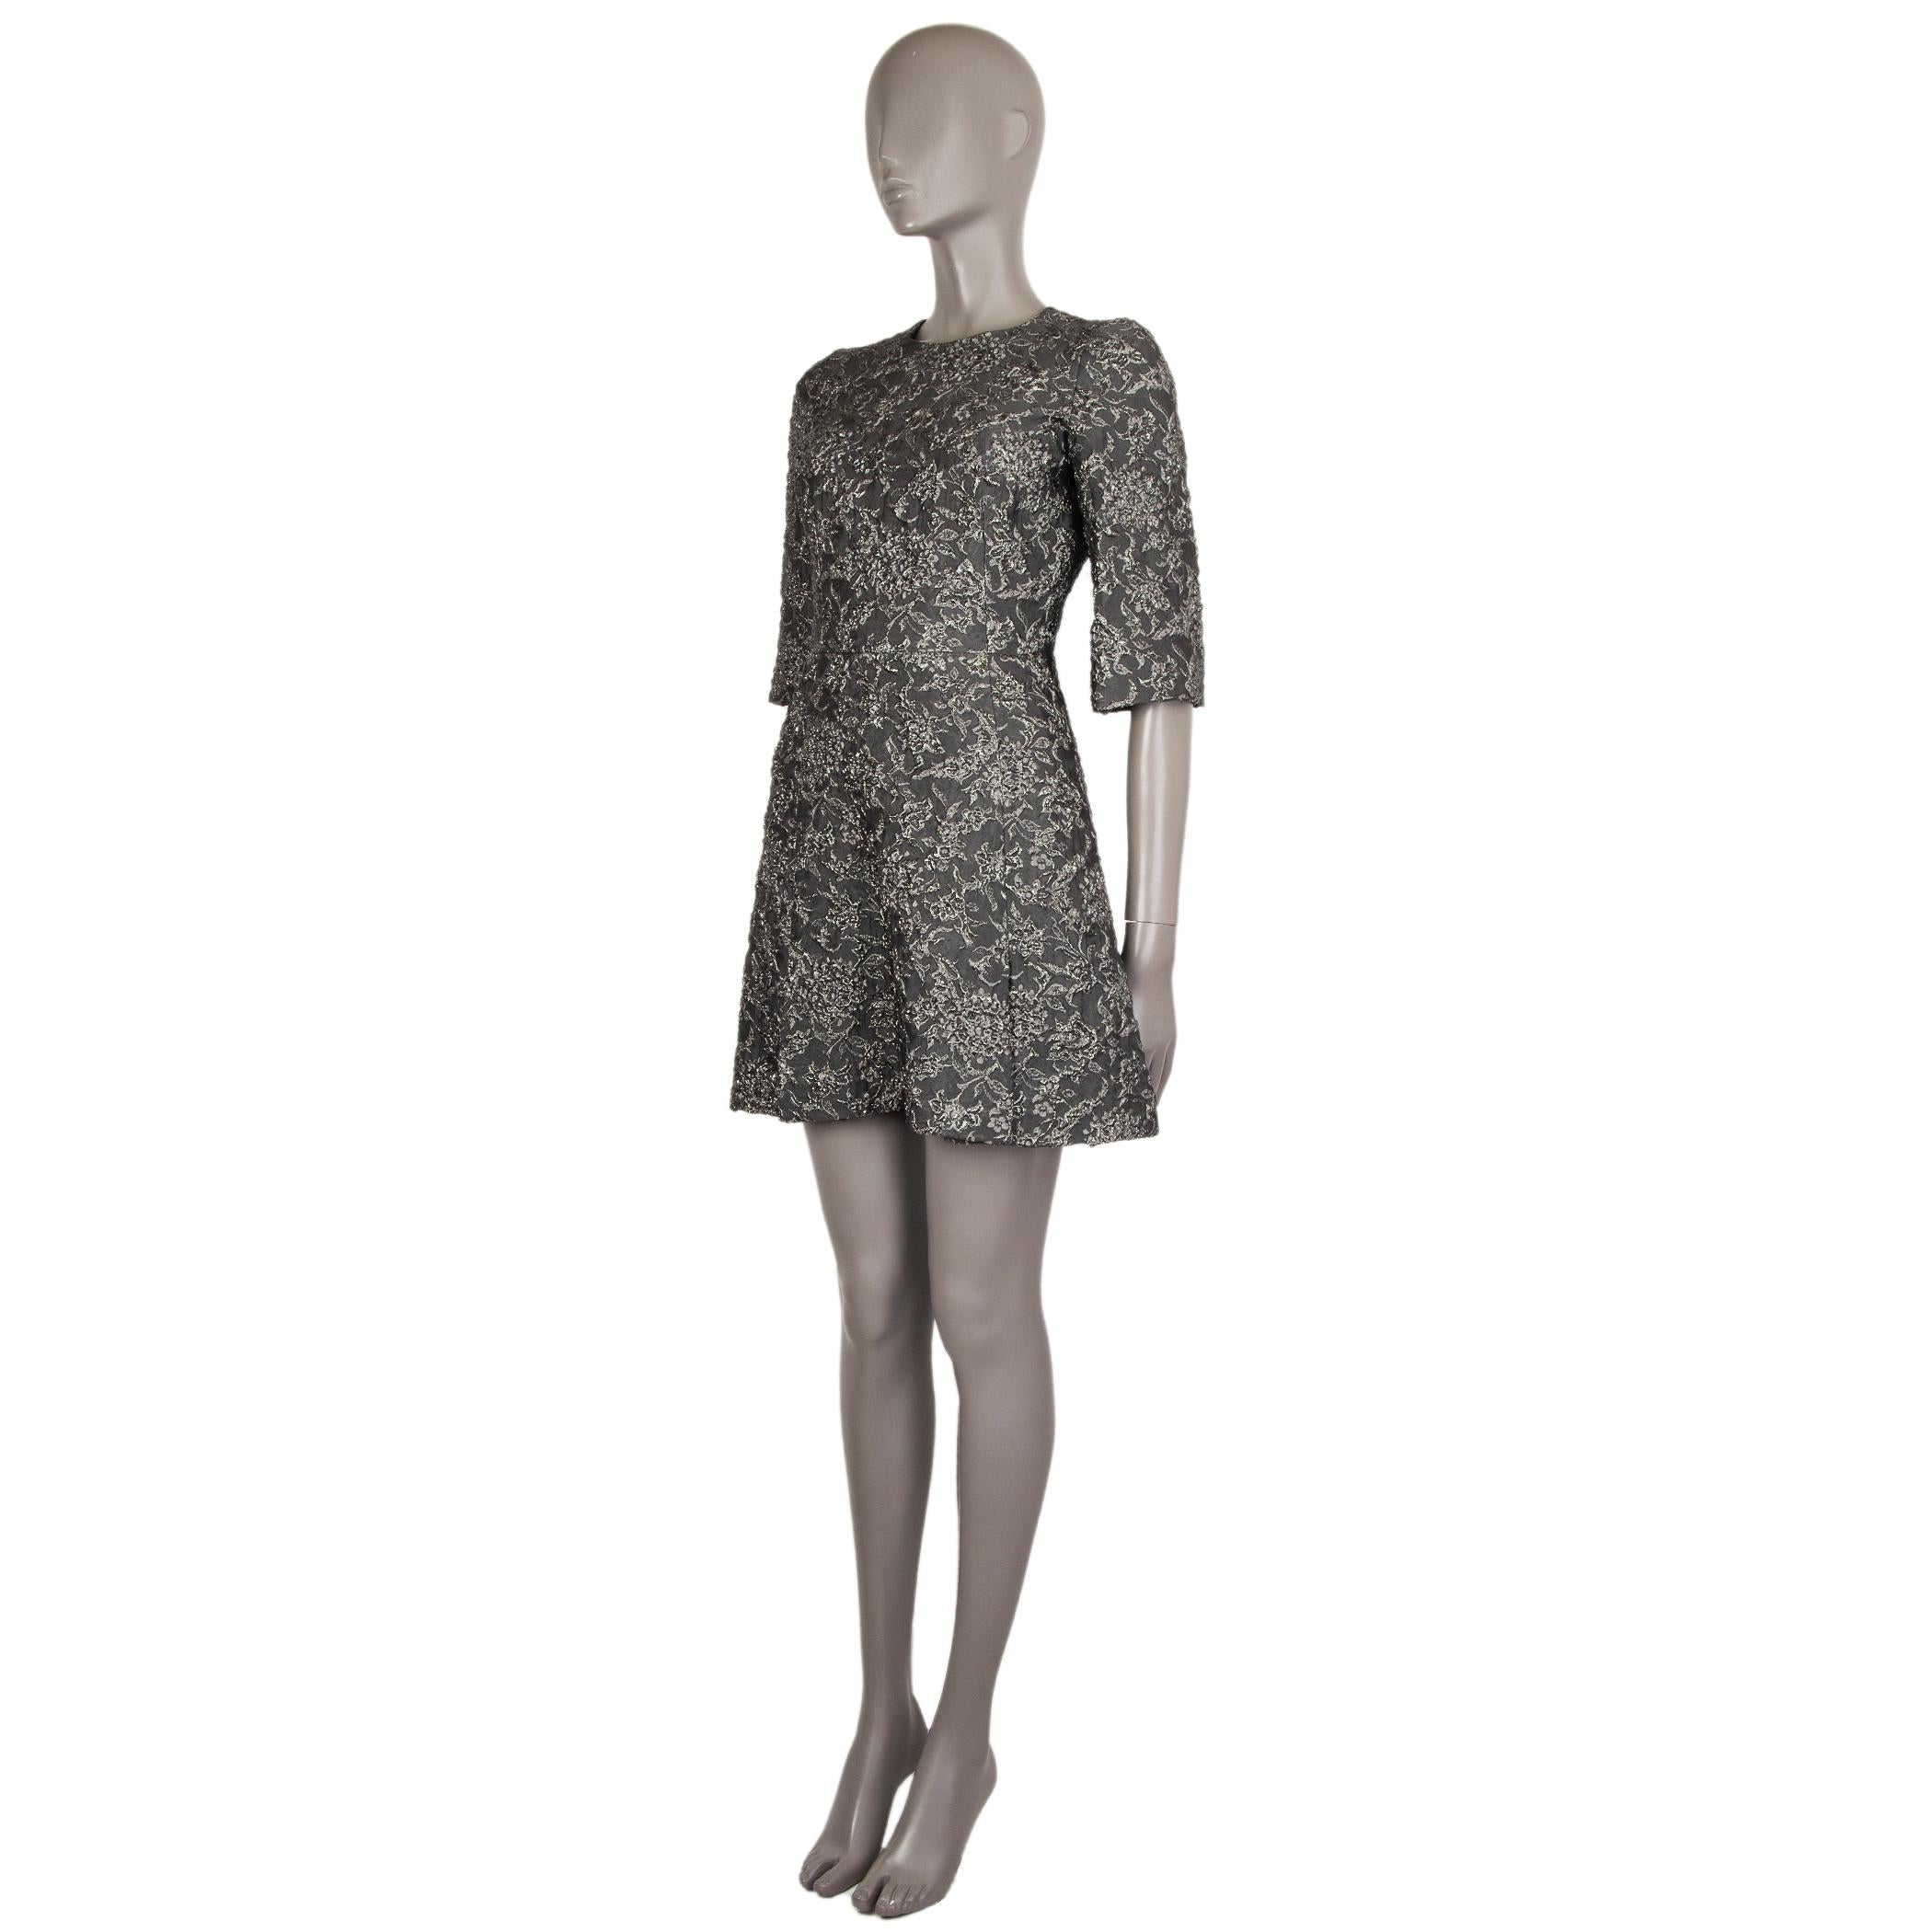 Dolce & Gabbana metallic jacquard 3/4-sleeve dress in grey and silver acetate (38%), nylon (27%), silk (19%), and polyester (18%). With slits around the hemline, Closes with concealed zipper on the back. Lined in grey silk (96%) and elastane (4%).